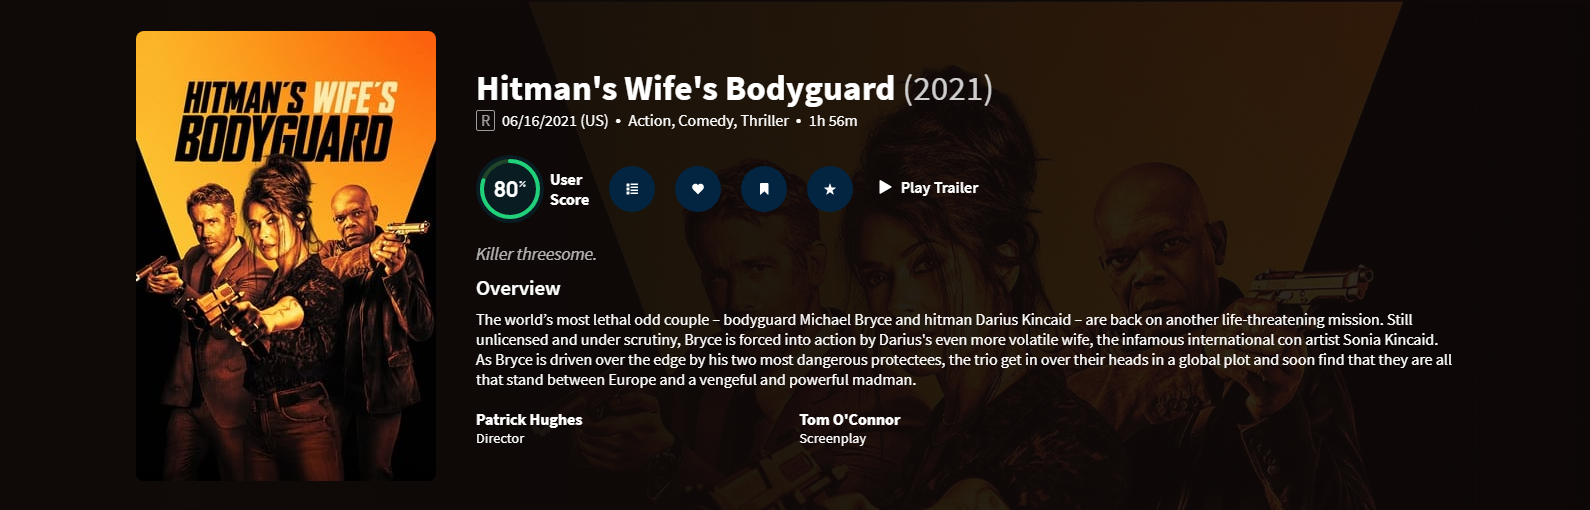 Hitman's Wife's Bodyguard ss.png